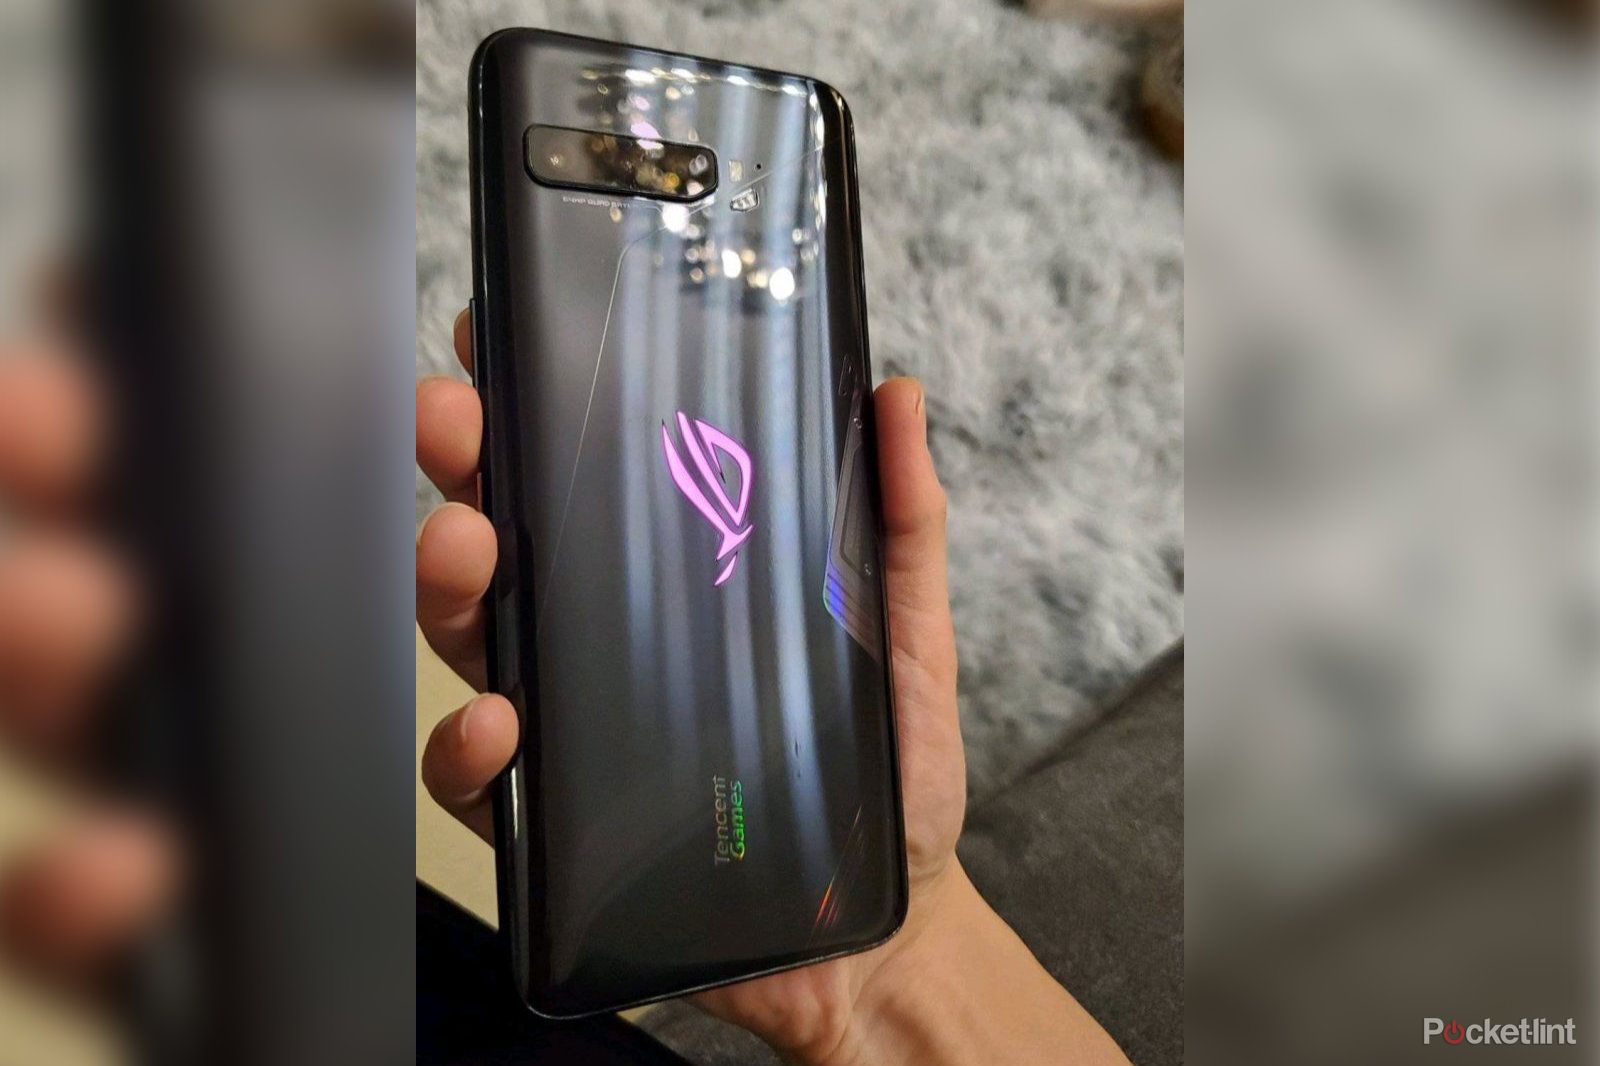 Asus ROG Phone 3 shows up in hands-on pictures image 1